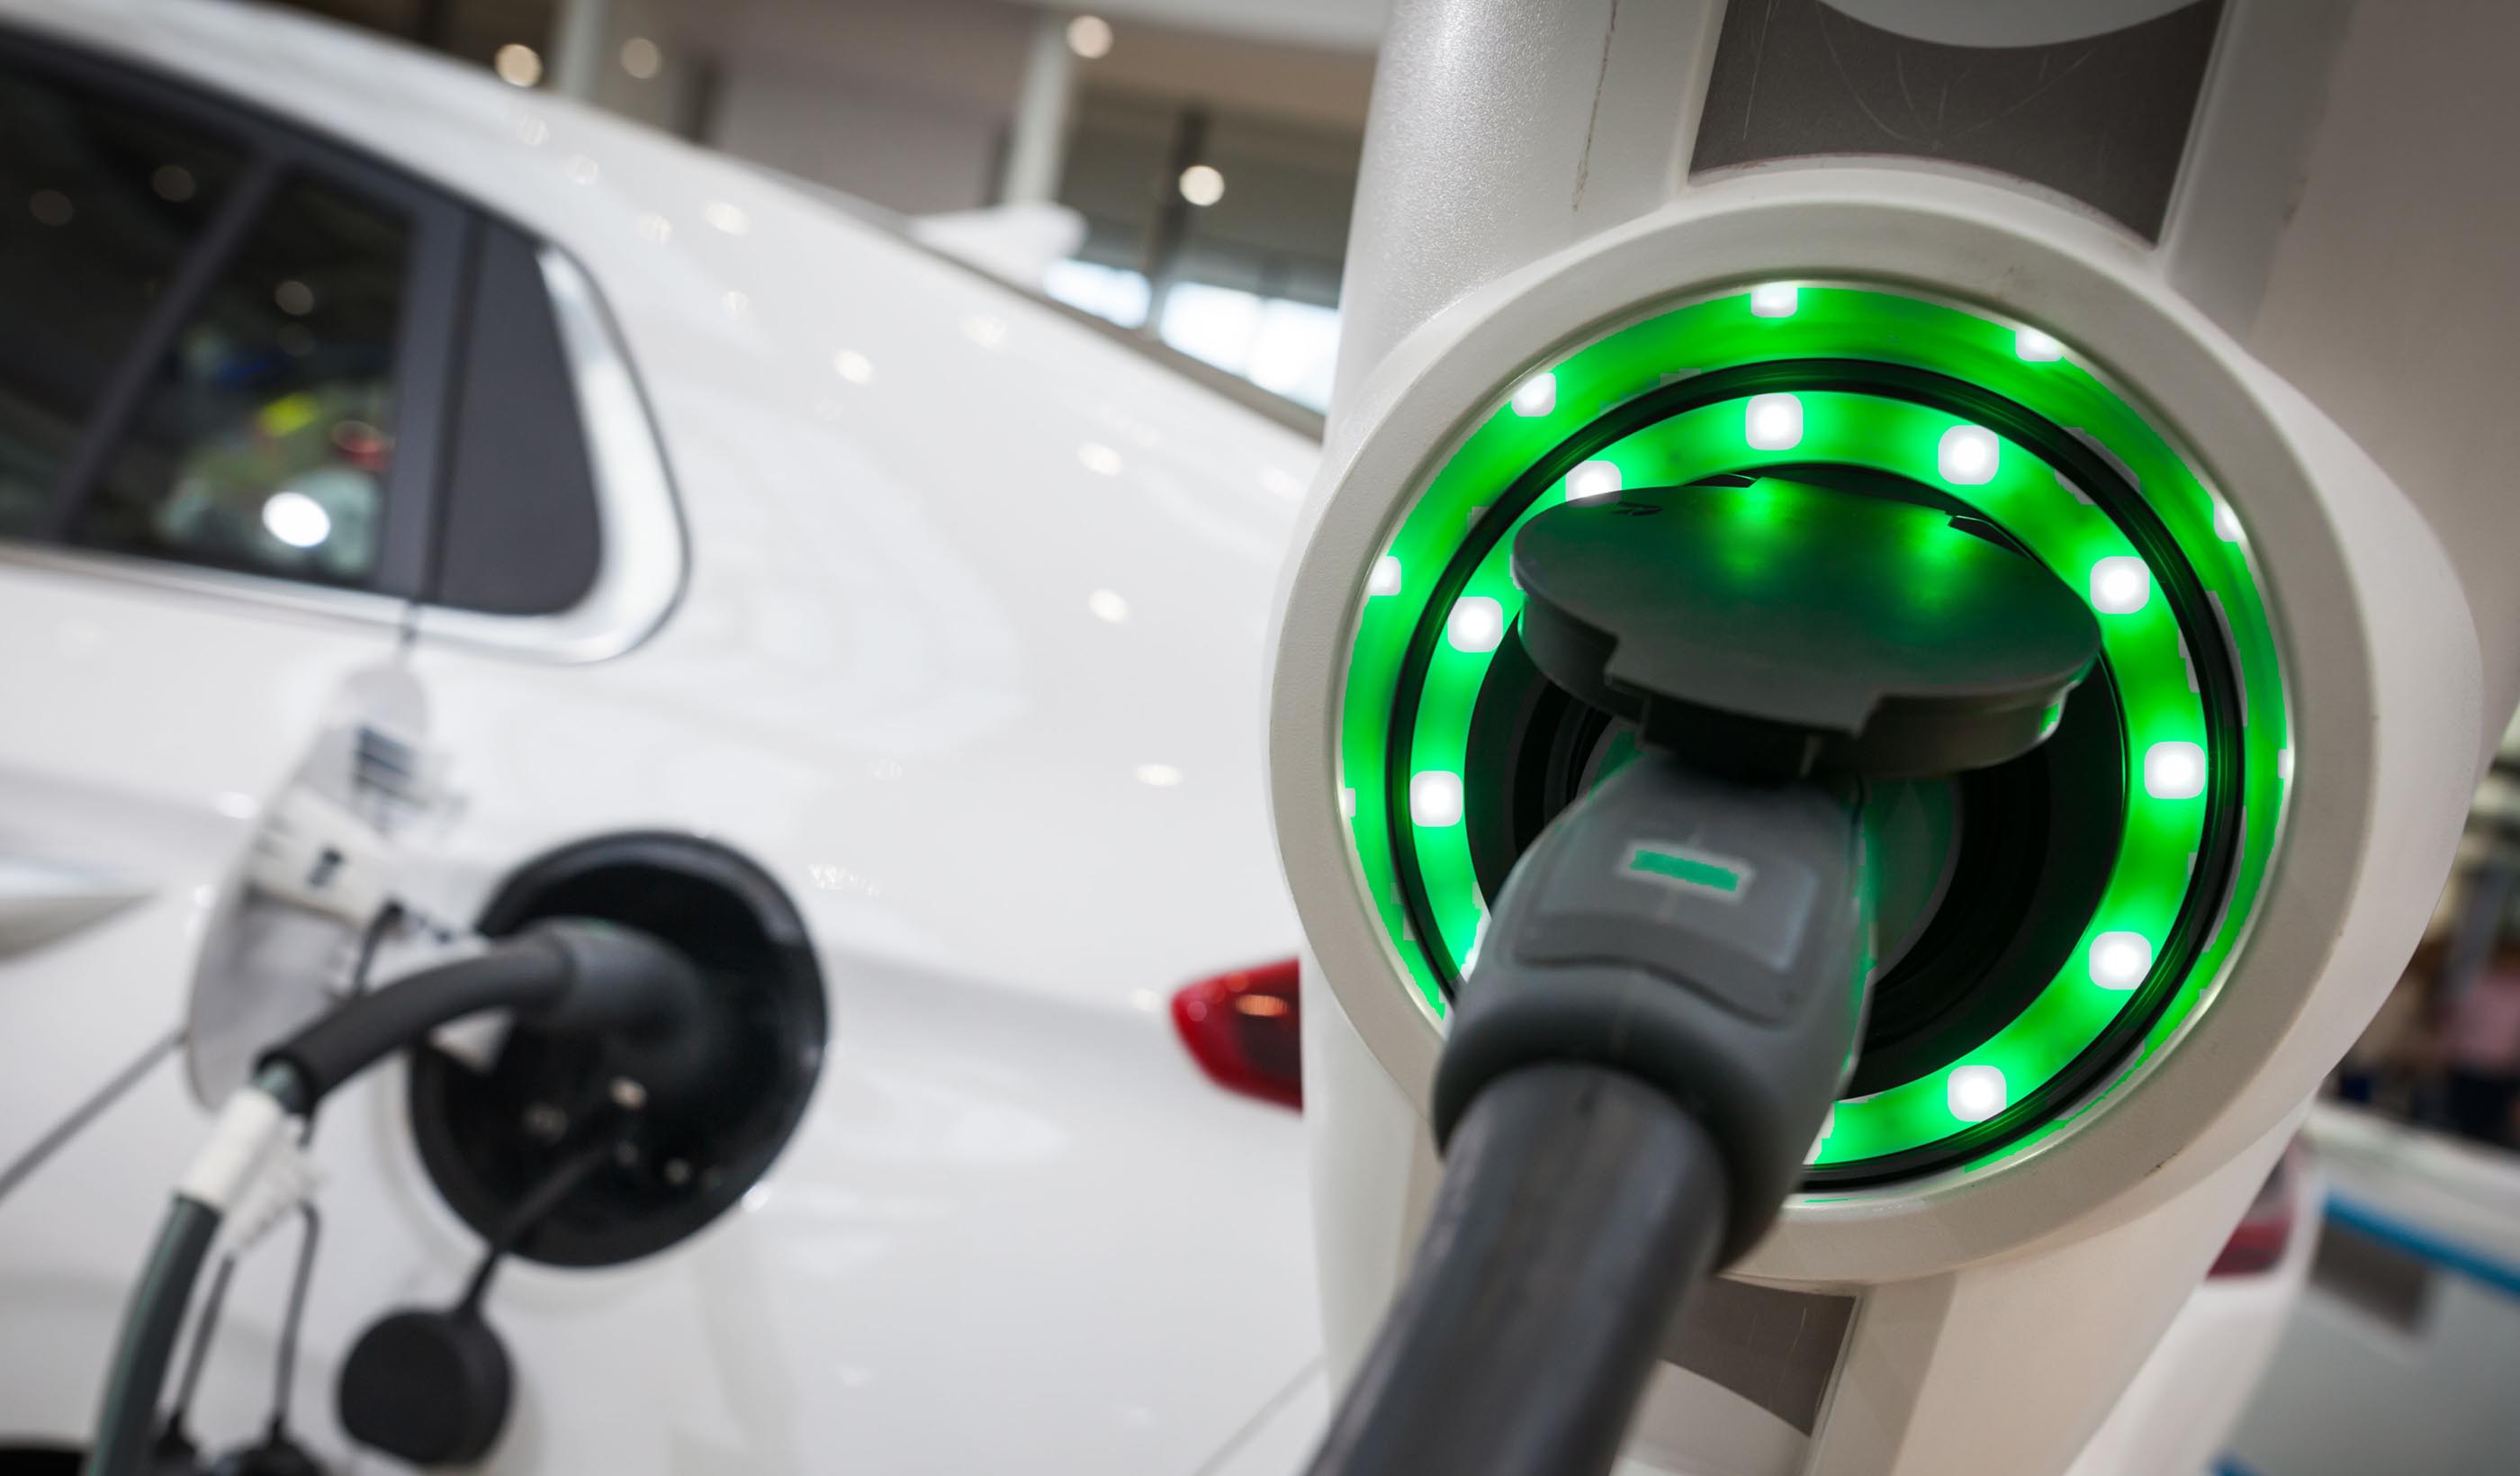 Power poverty: the new paradigm for social and economic inequality of electric vehicles